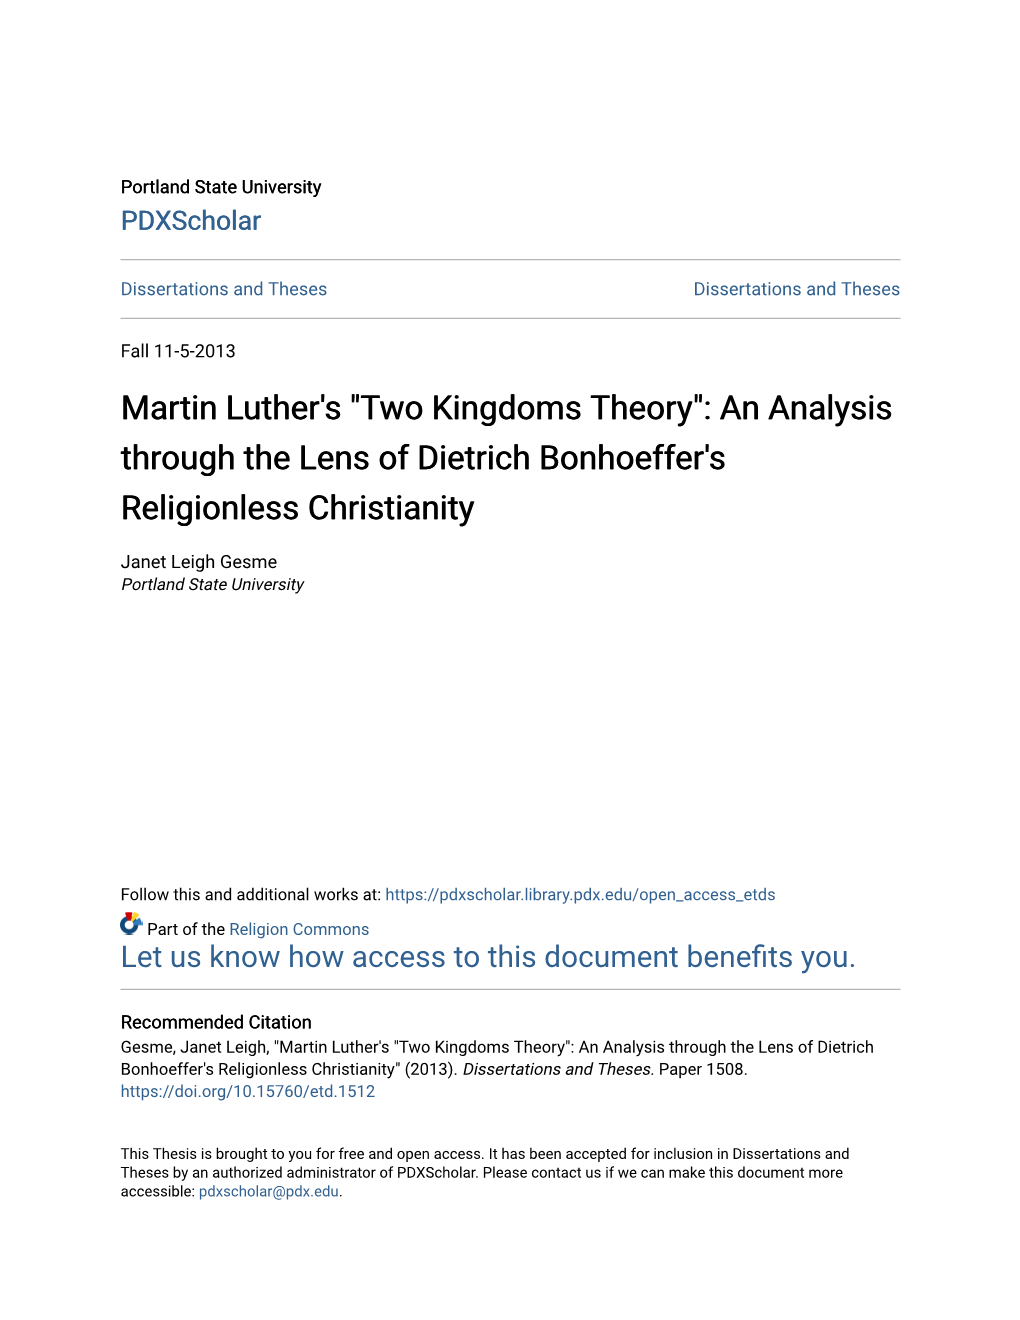 Martin Luther's "Two Kingdoms Theory": an Analysis Through the Lens of Dietrich Bonhoeffer's Religionless Christianity